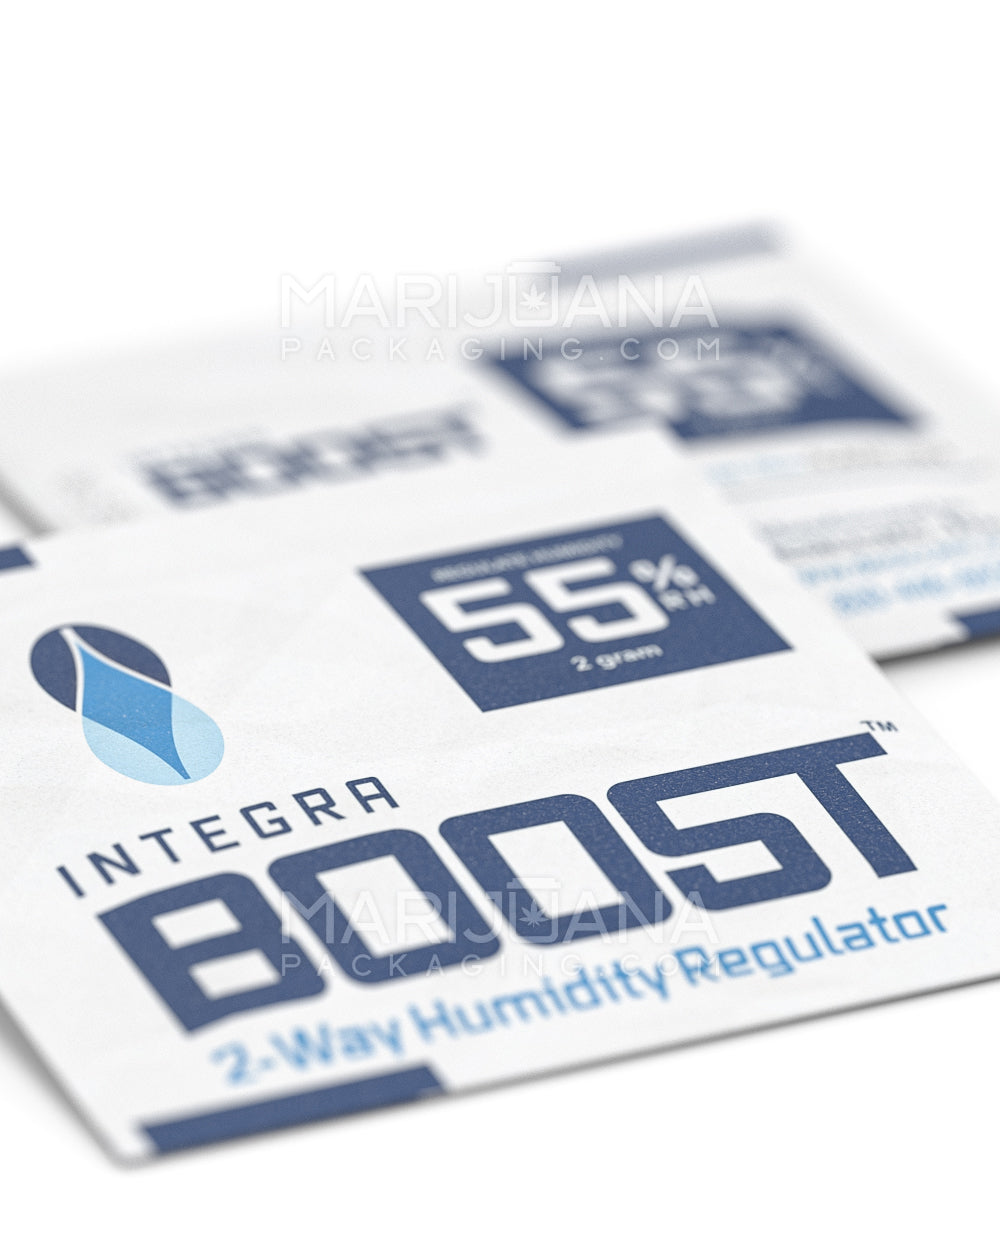 INTEGRA | Boost Humidity Pack | 2 Grams - 55% - 100 Count - 4